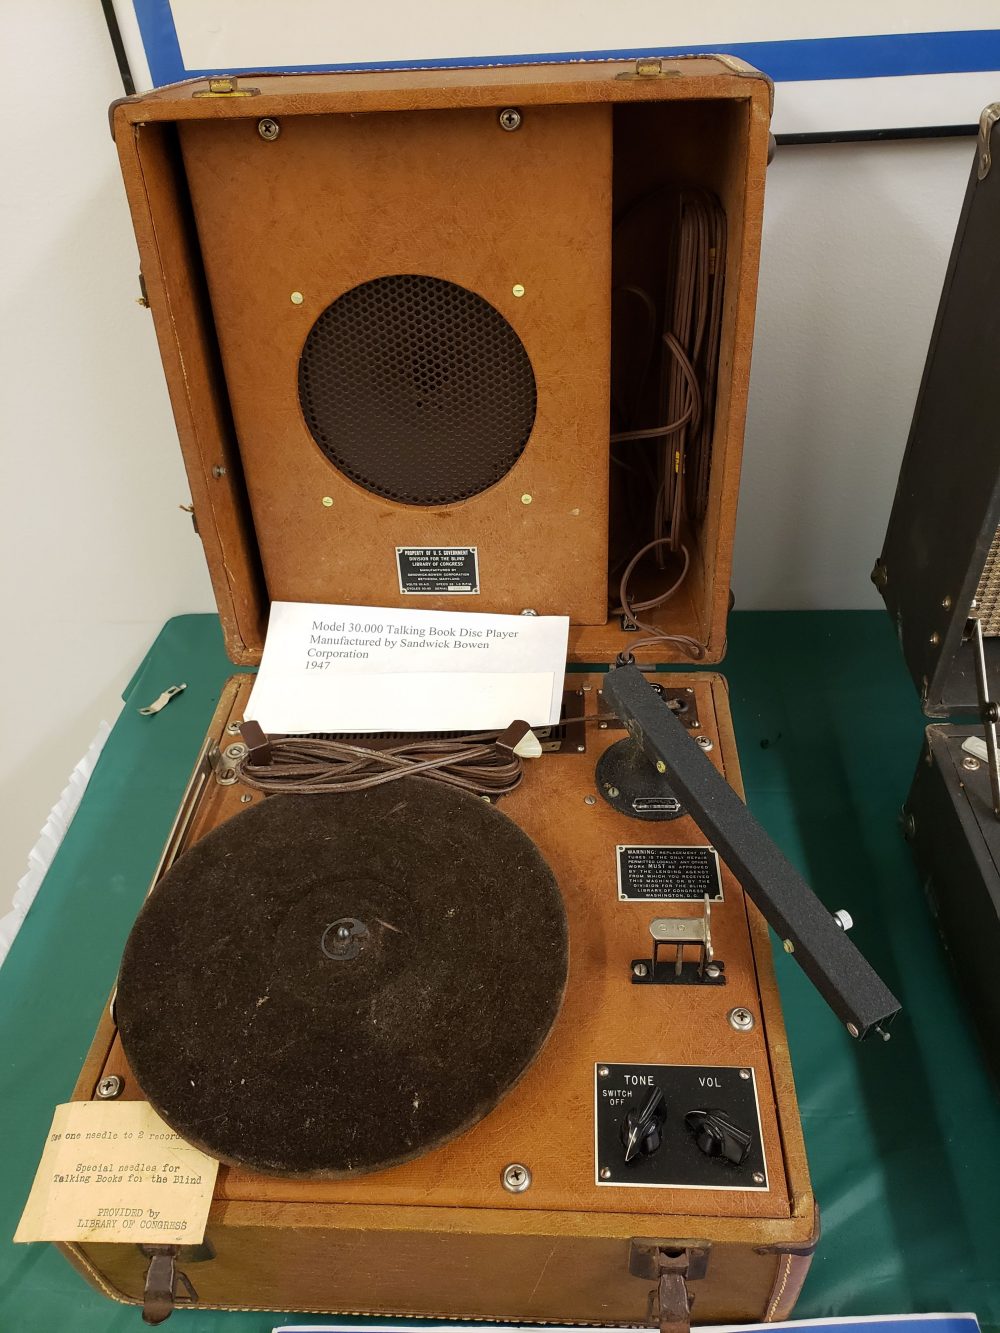 Model 30.000 Talking Book Record Player Manufactured by Sandwick Bowen Corporation, 1947.